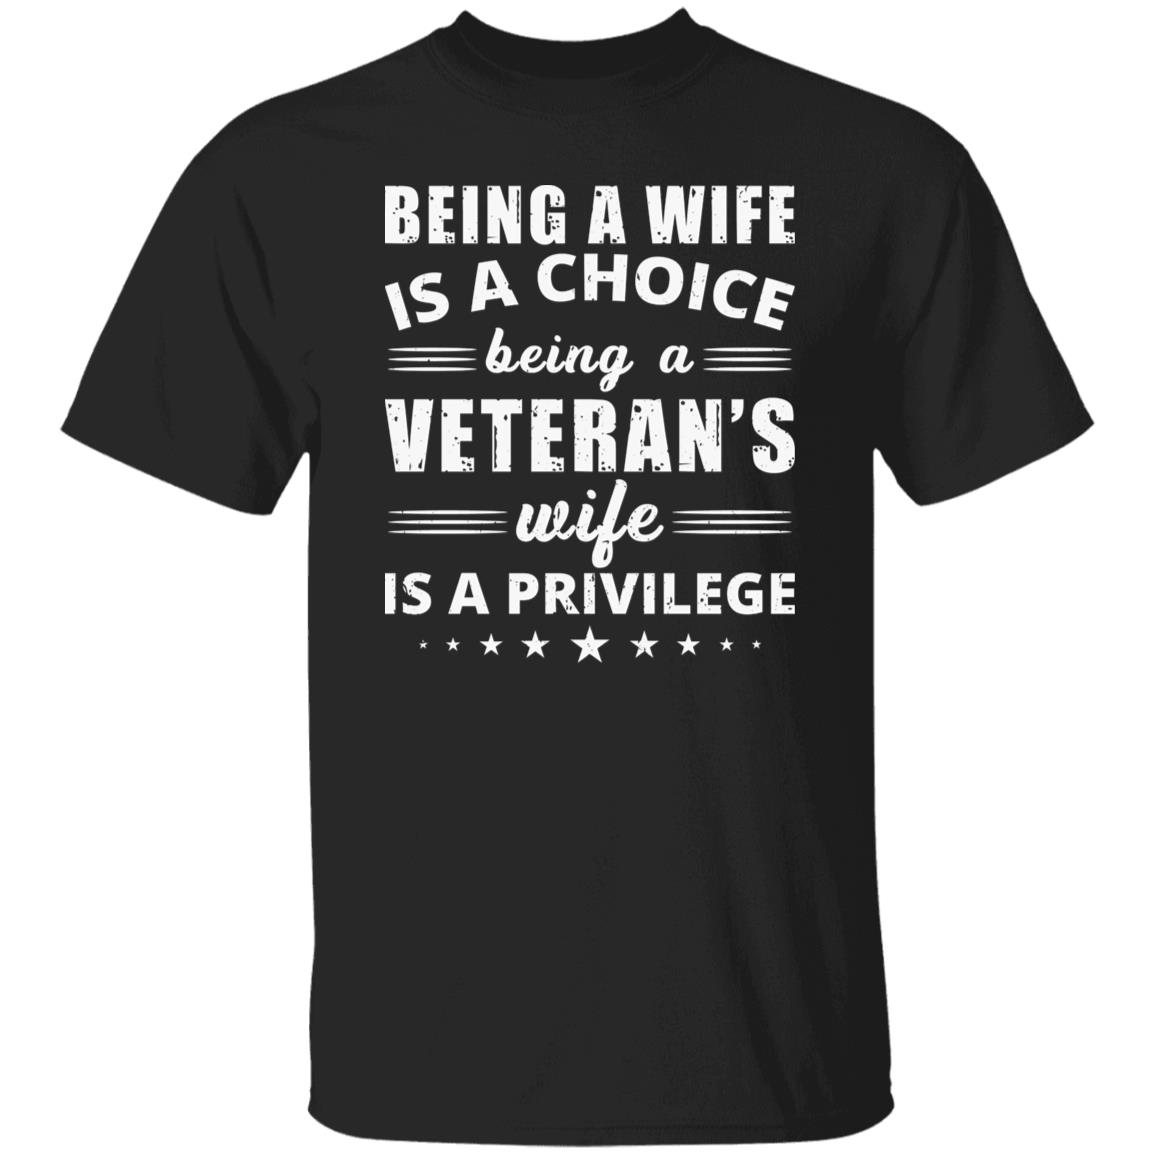 Being a wife is a choice being a veteran's wife is a privilege gift shirt